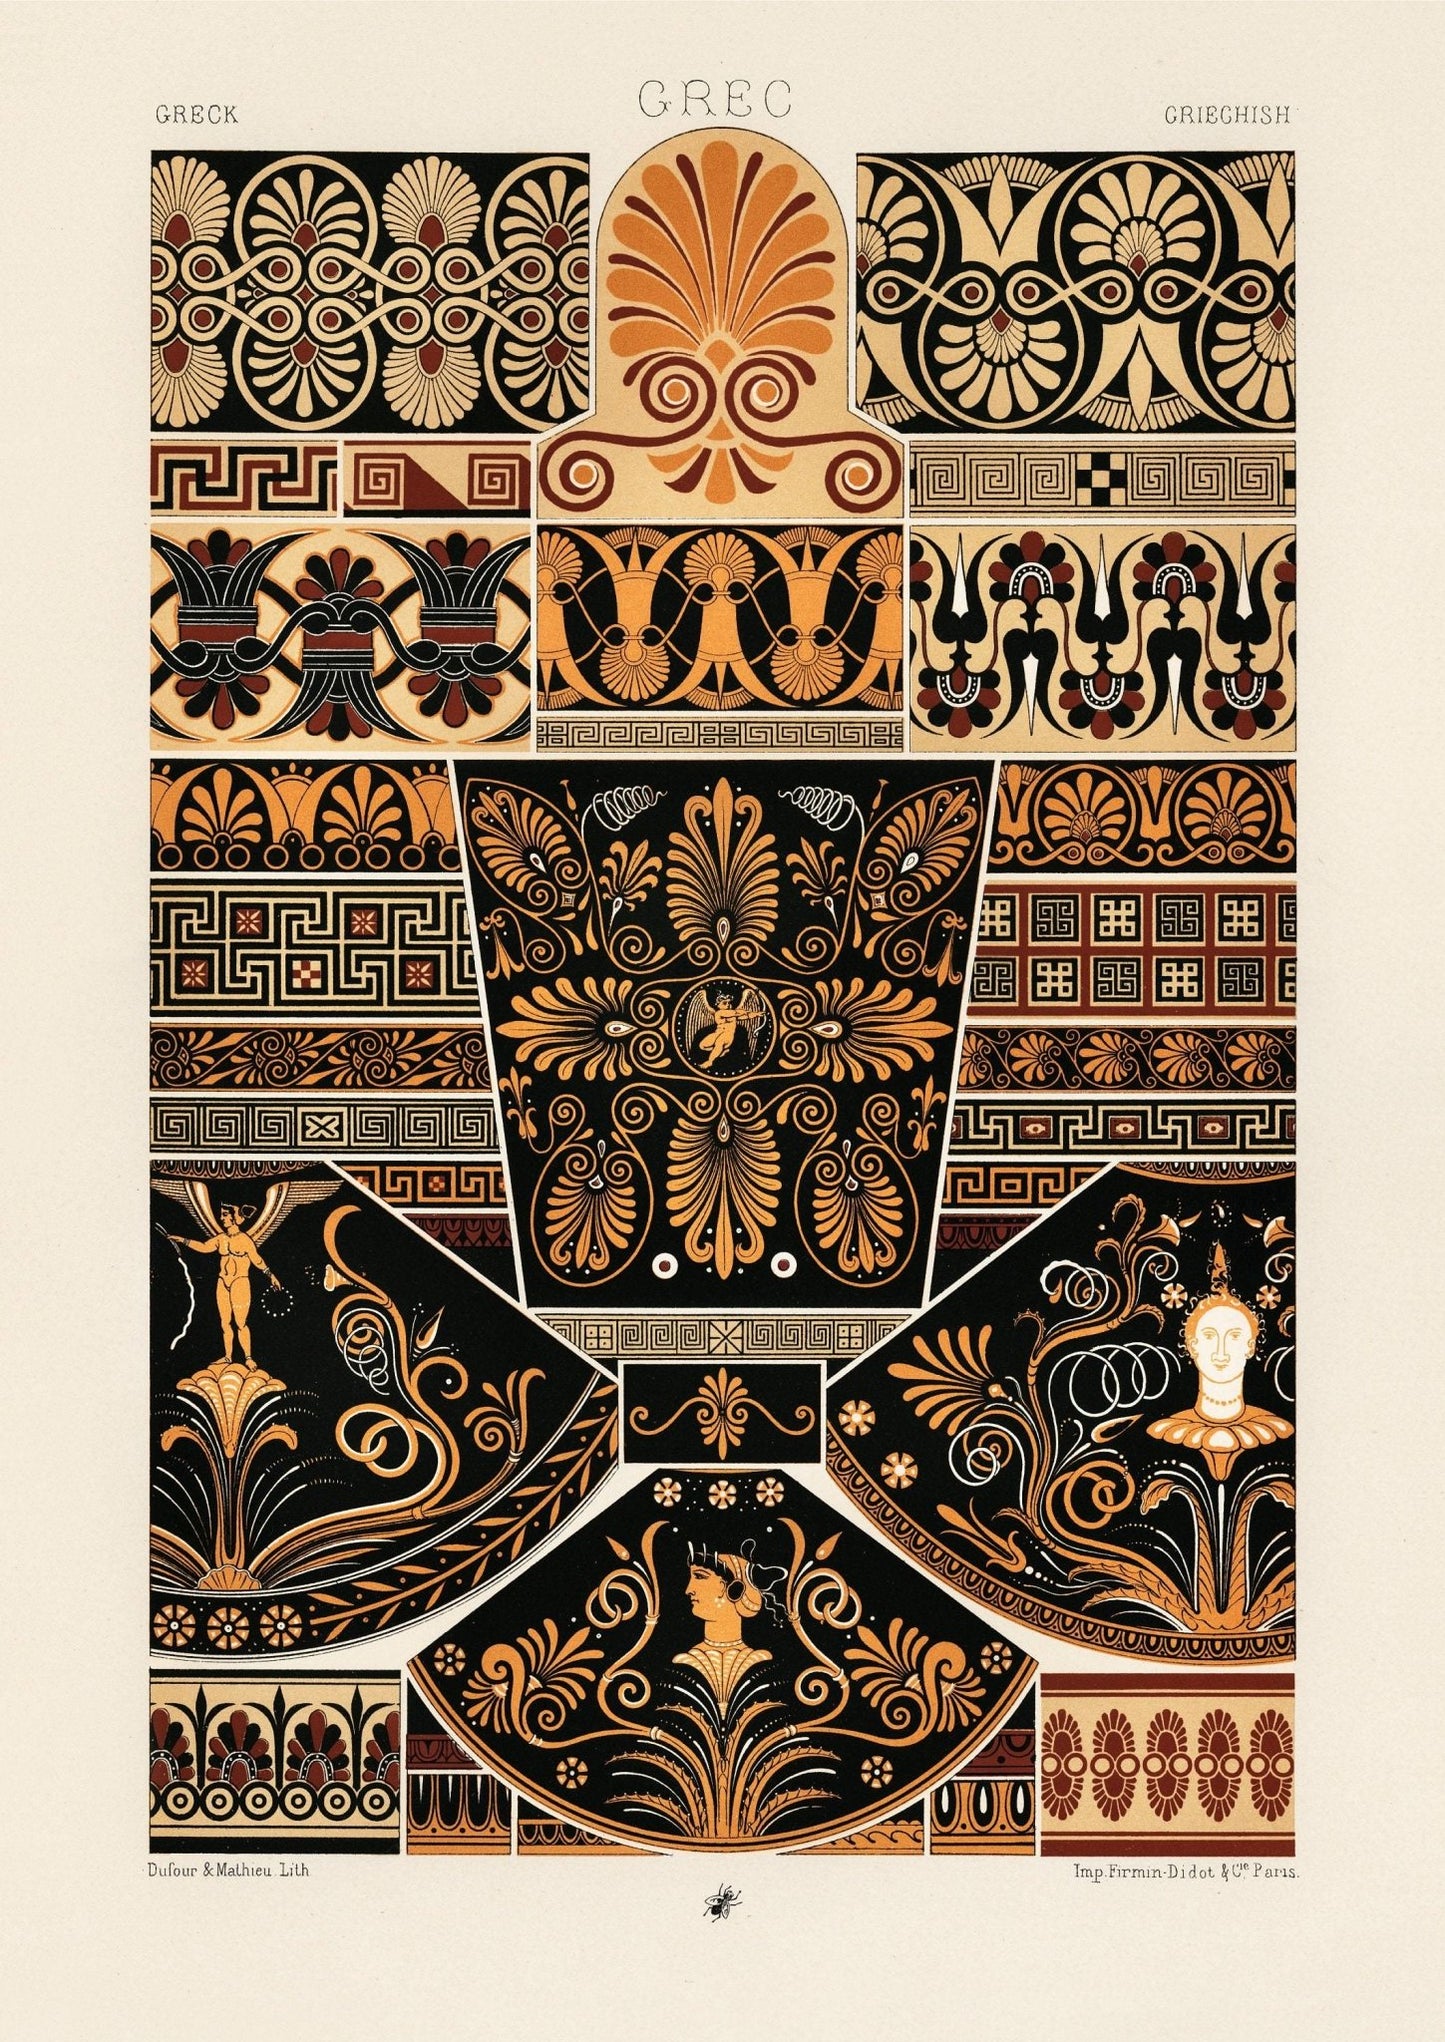 ALBERT RACINET - Greek Pattern Lithograph from 'L'ornement Polychrome'